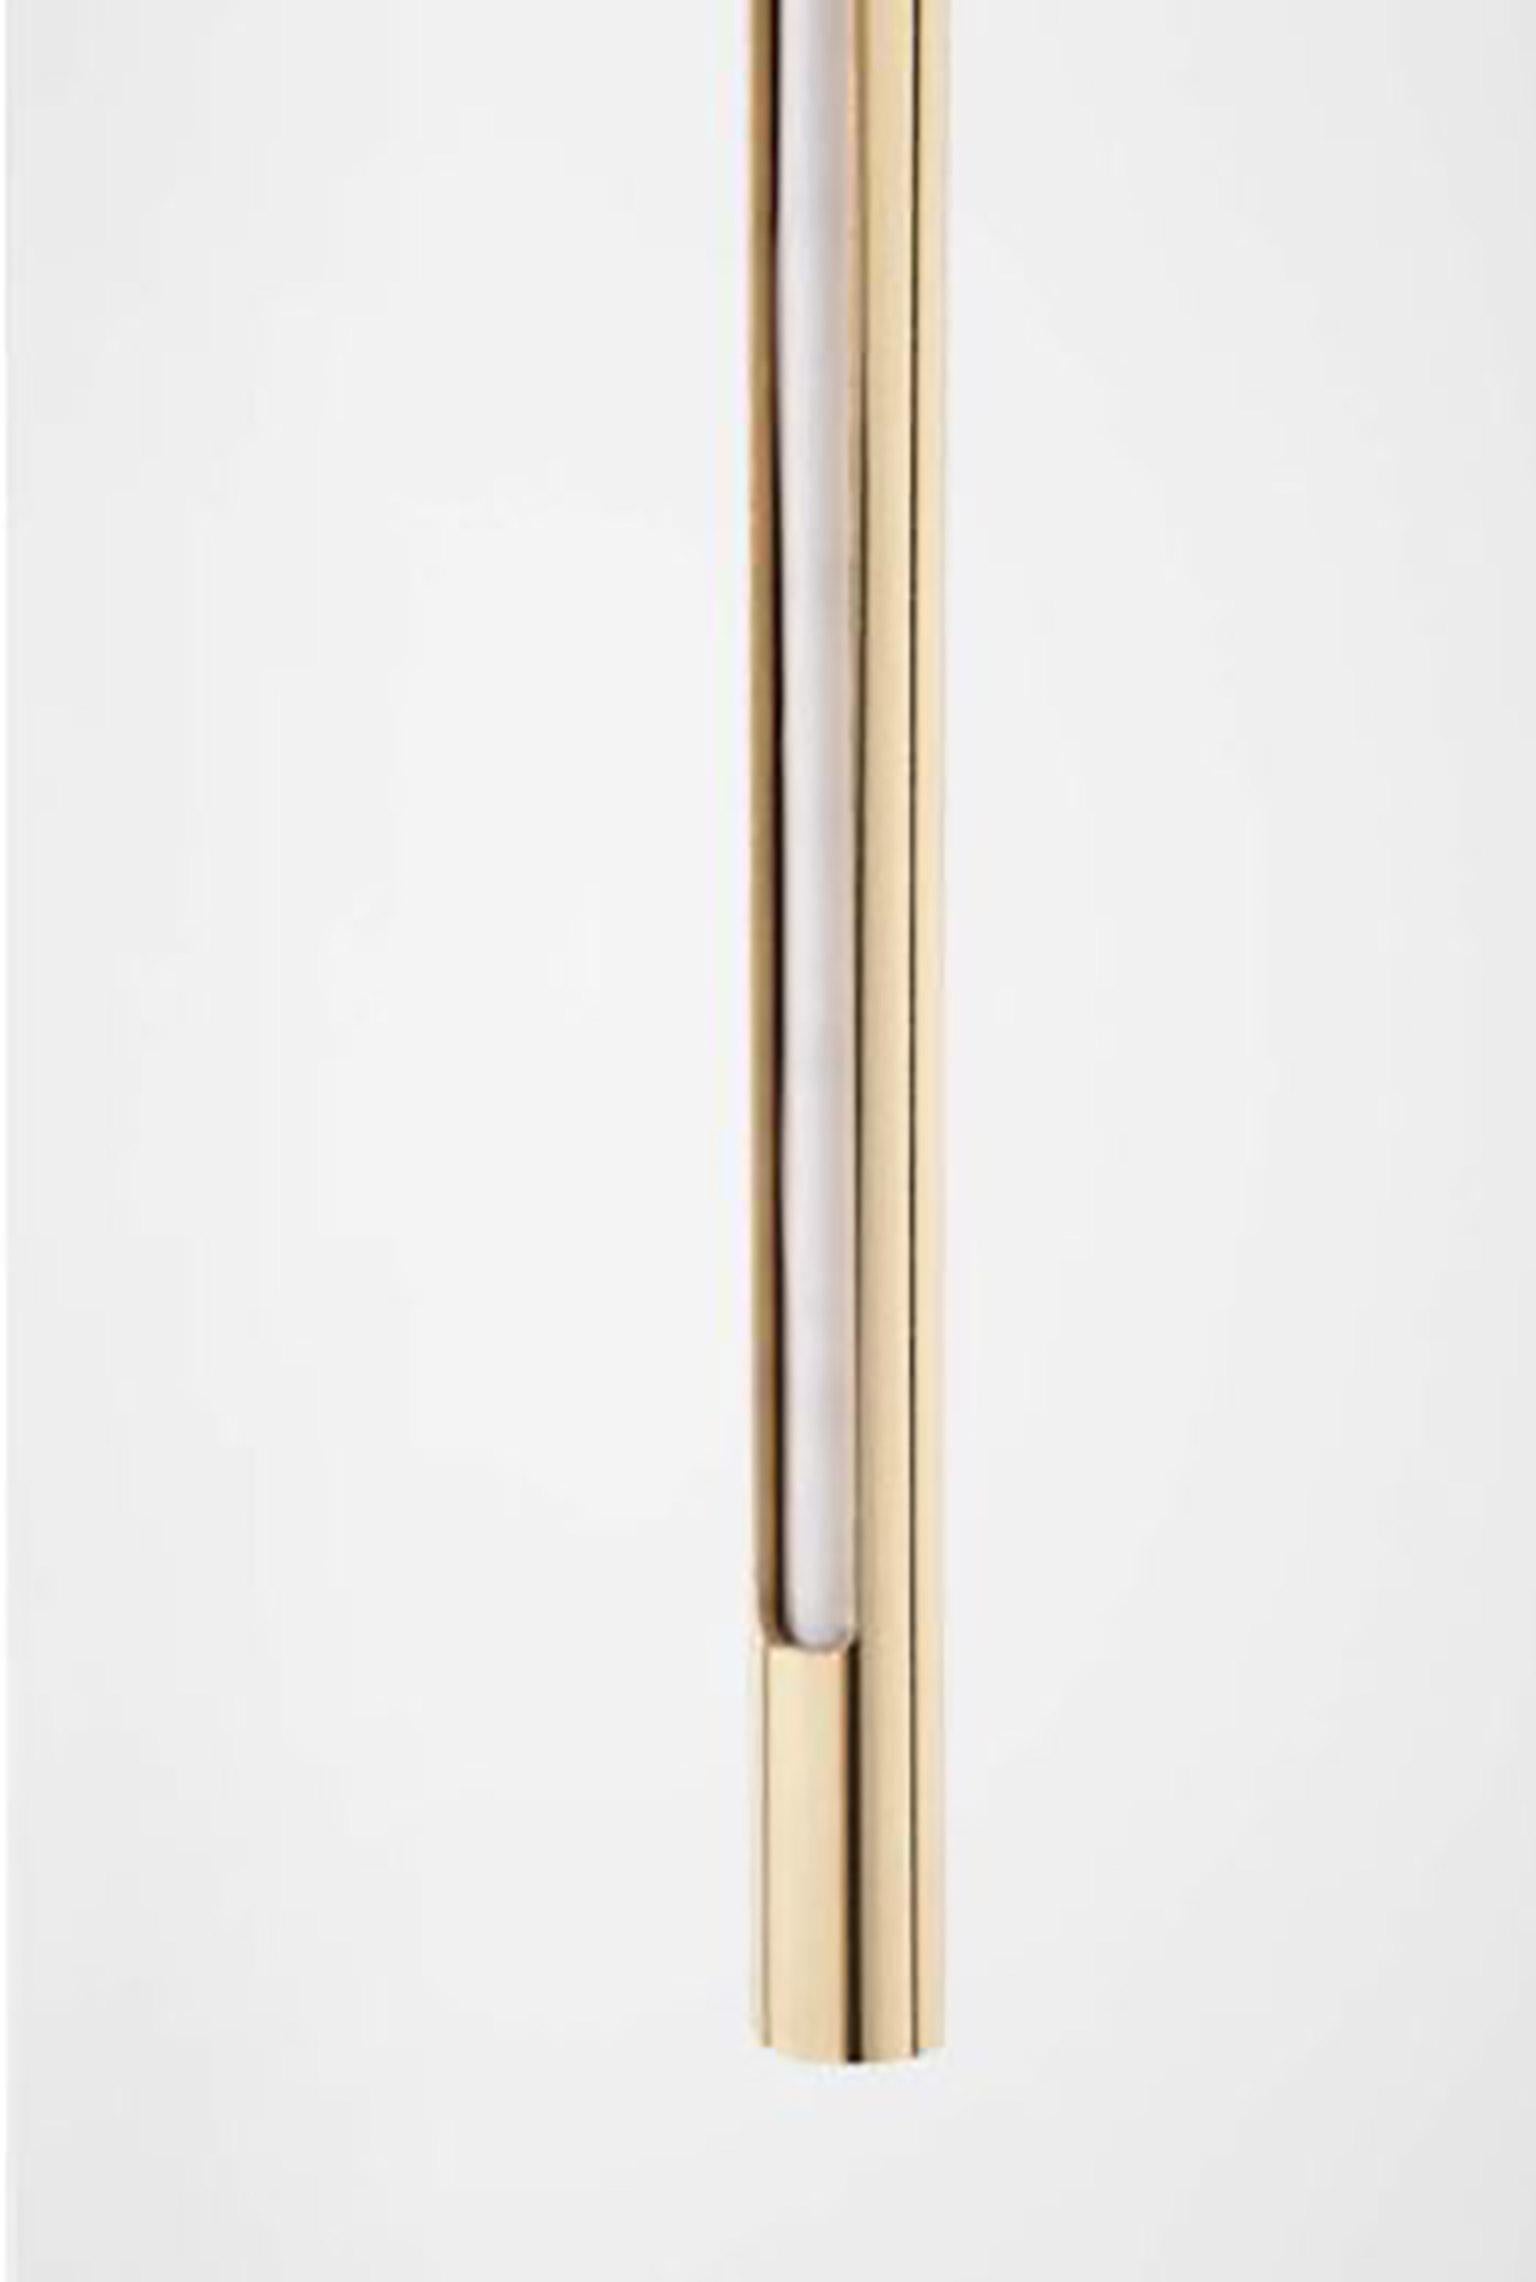 Polished Gold Contemporary Ceiling Lamp in Tubular Brass, Led Lamp Type